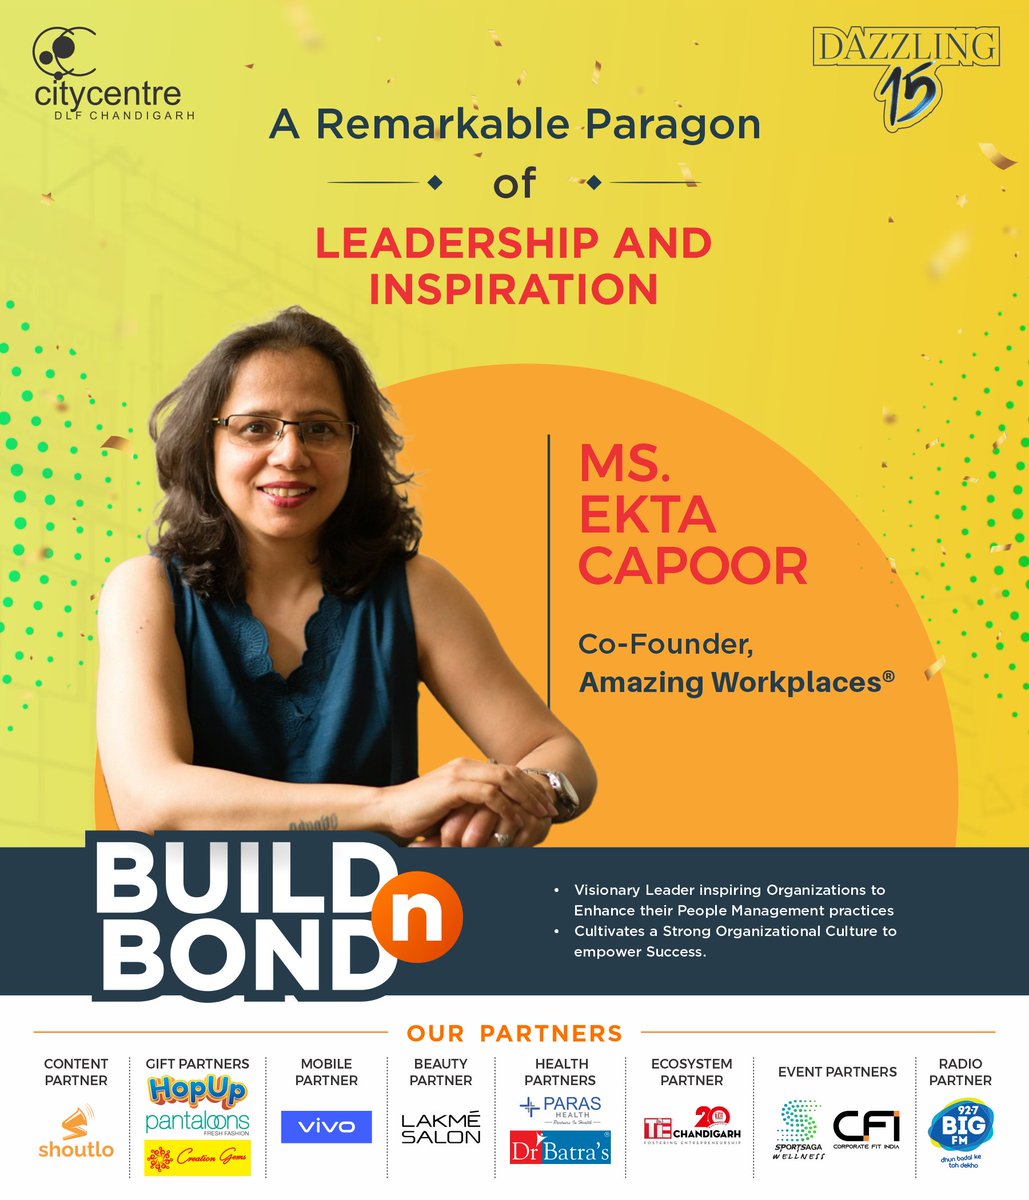 Presenting Ms. Ekta Capoor, co-founder of #AmazingWorkplaces. She inspires organizations to enhance people management through a holistic 9-pillar framework. We are delighted and privileged to have such an #extraordinaryvisionary grace our event at #DLFCityCentreChandigarh!